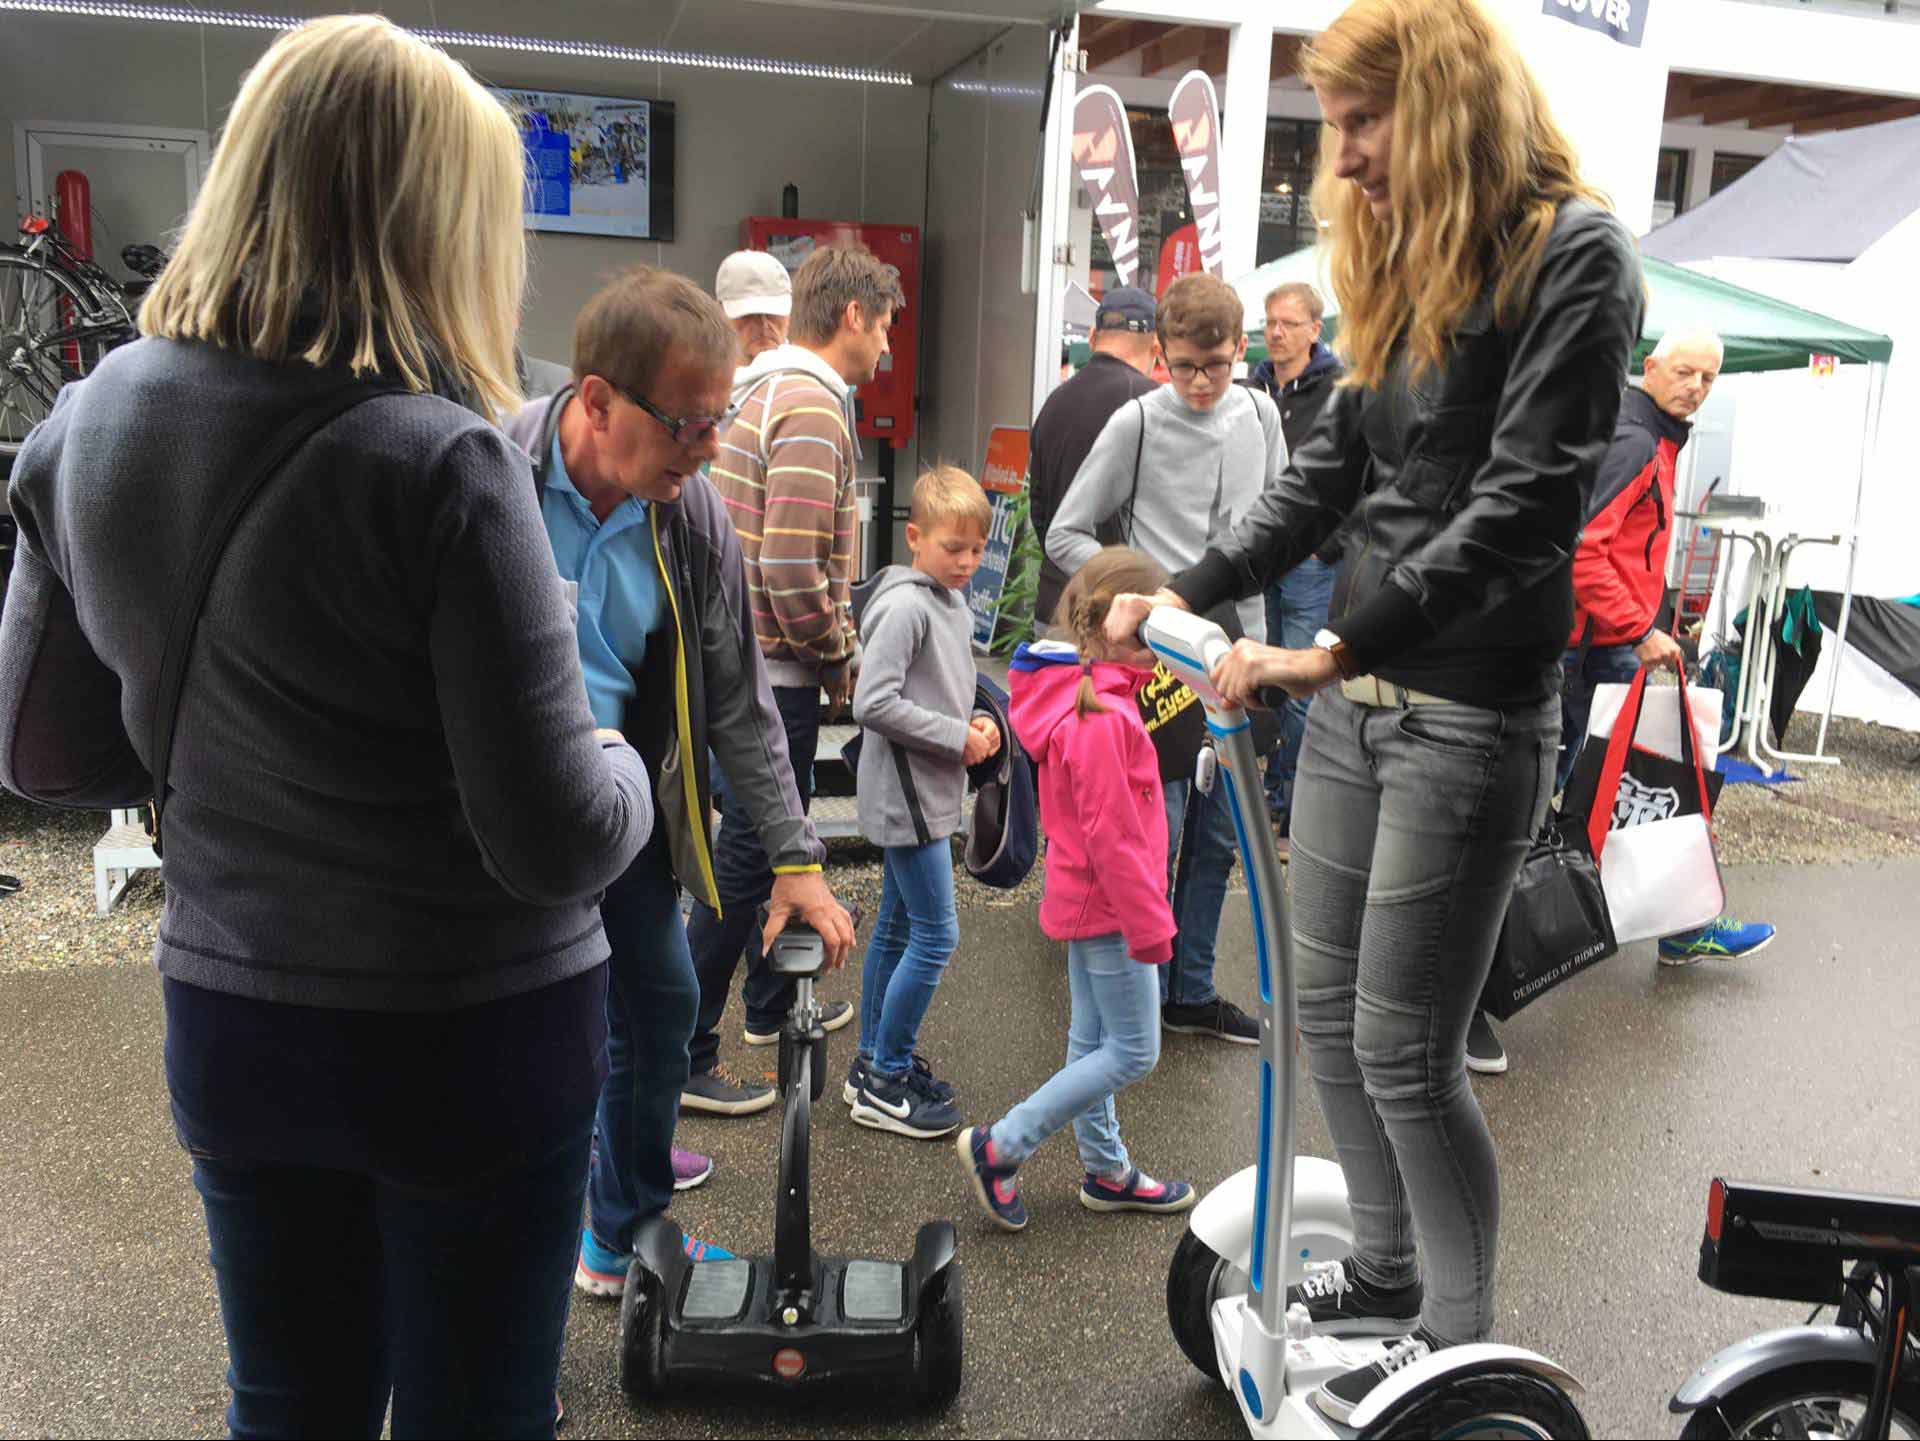 Airwheel S3 2-wheeled electric scooter